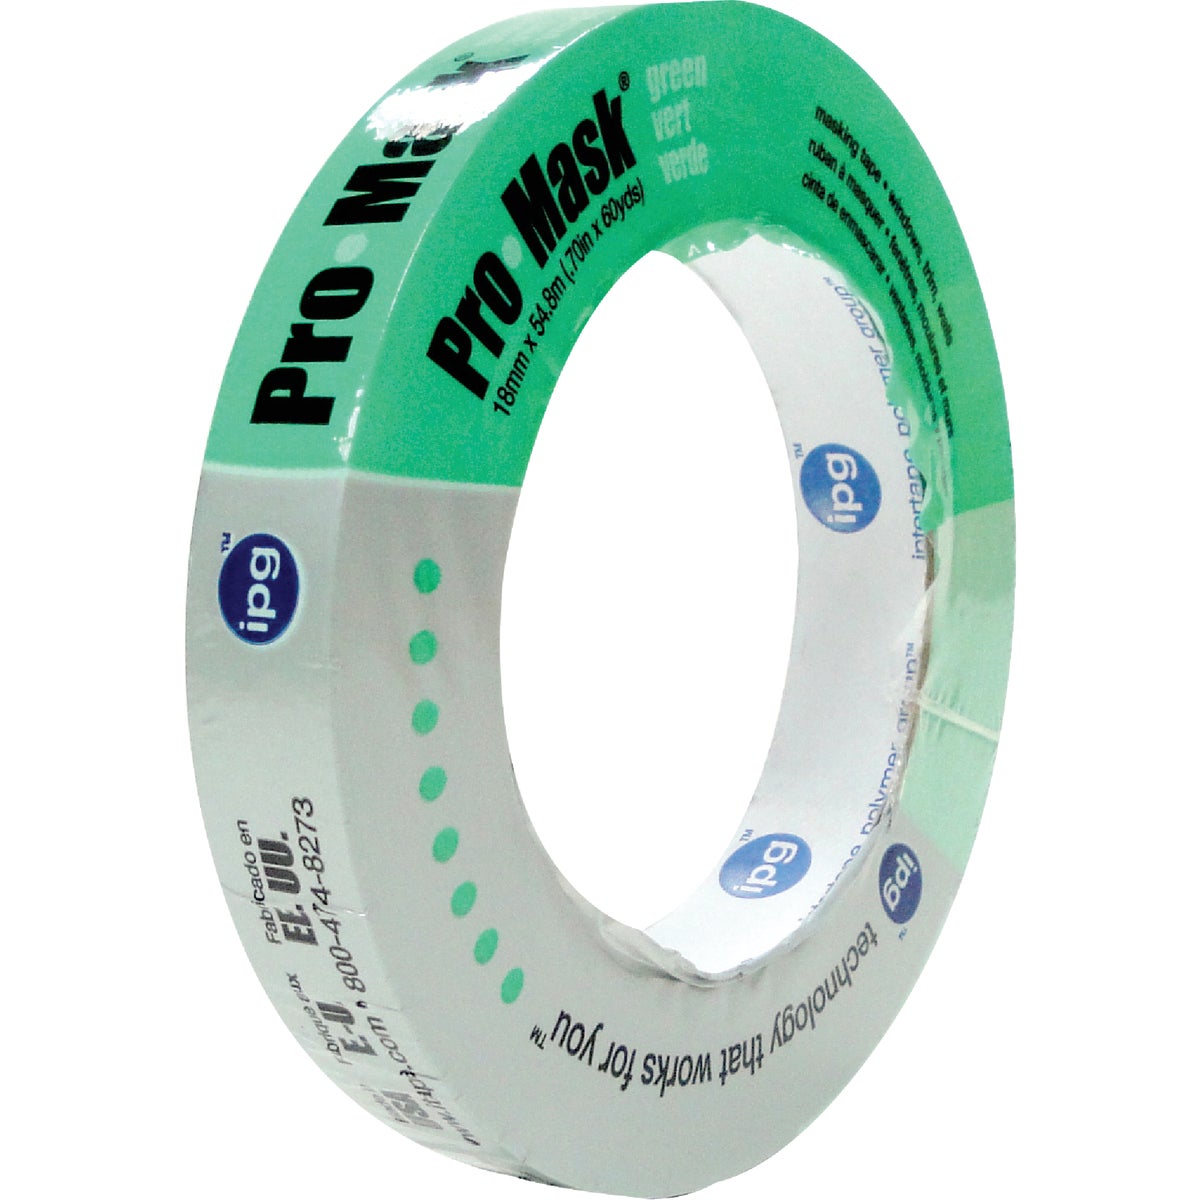 IPG ProMask Green 0.70 In. x 60 Yd. Professional Green Painter's Grade Masking Tape